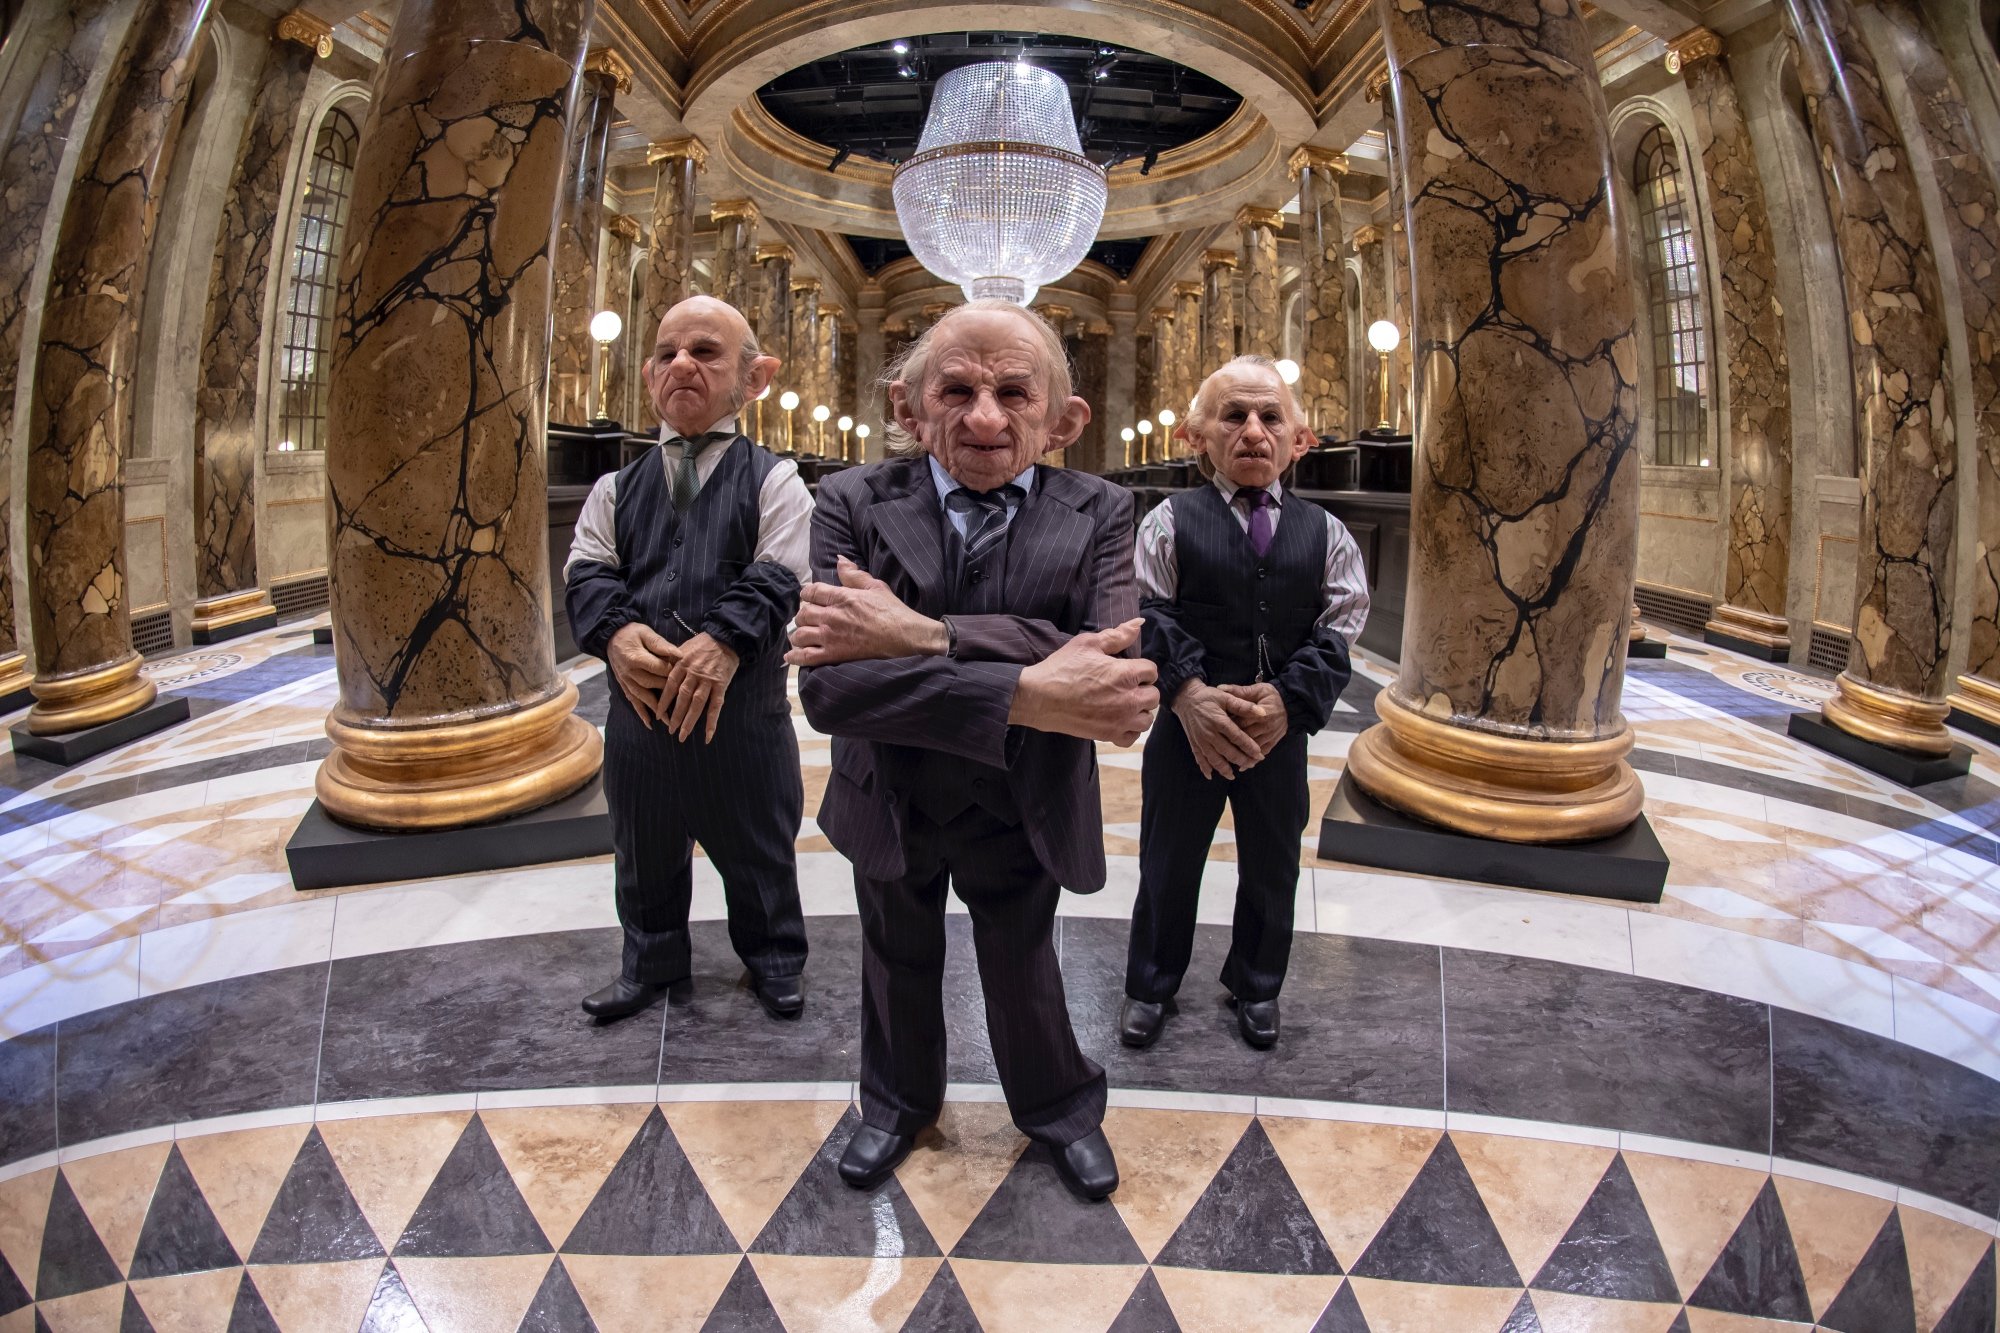 'Harry Potter' goblins in the Gringotts Wizarding Bank wearing suits for article about Jon Stewart 